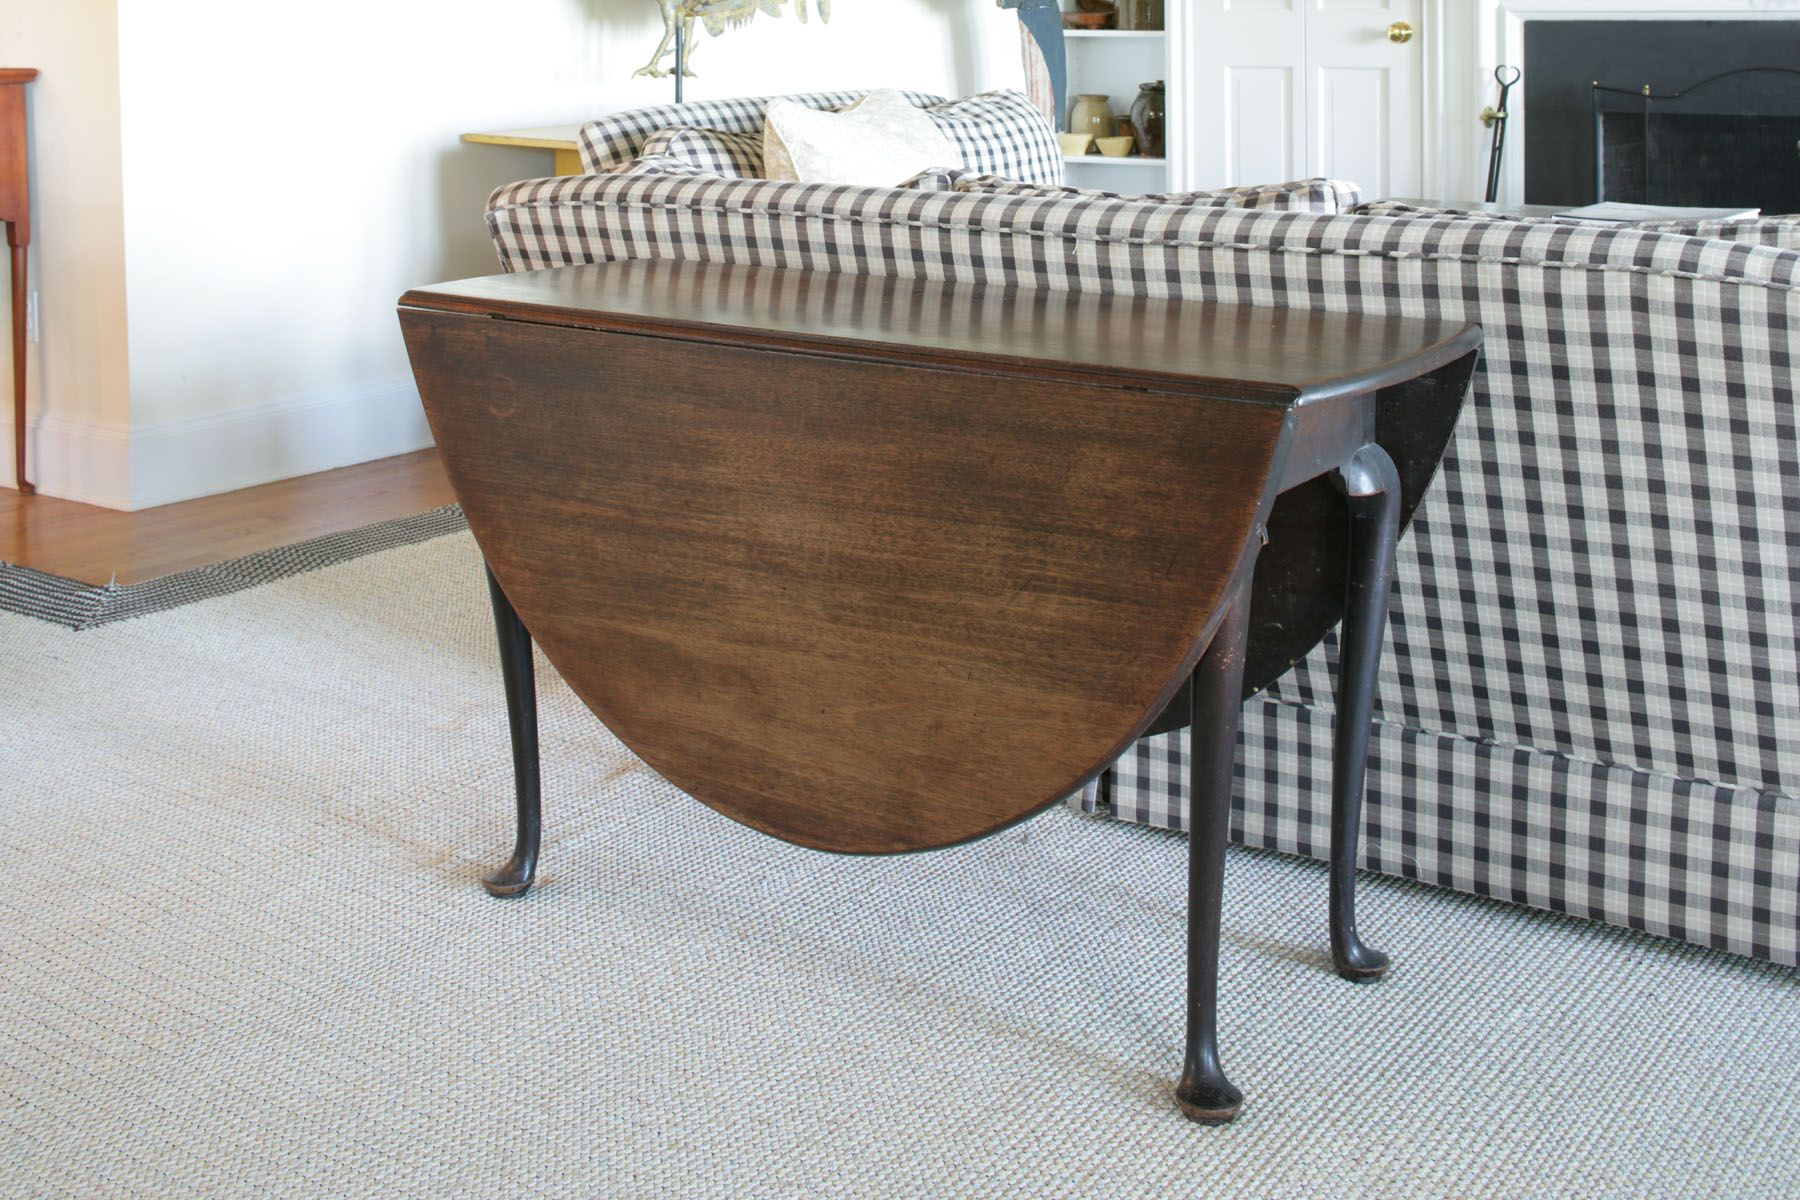 Drop Leaf Tables For Small Spaces – Homesfeed With Regard To Leaf Round Console Tables (View 8 of 20)